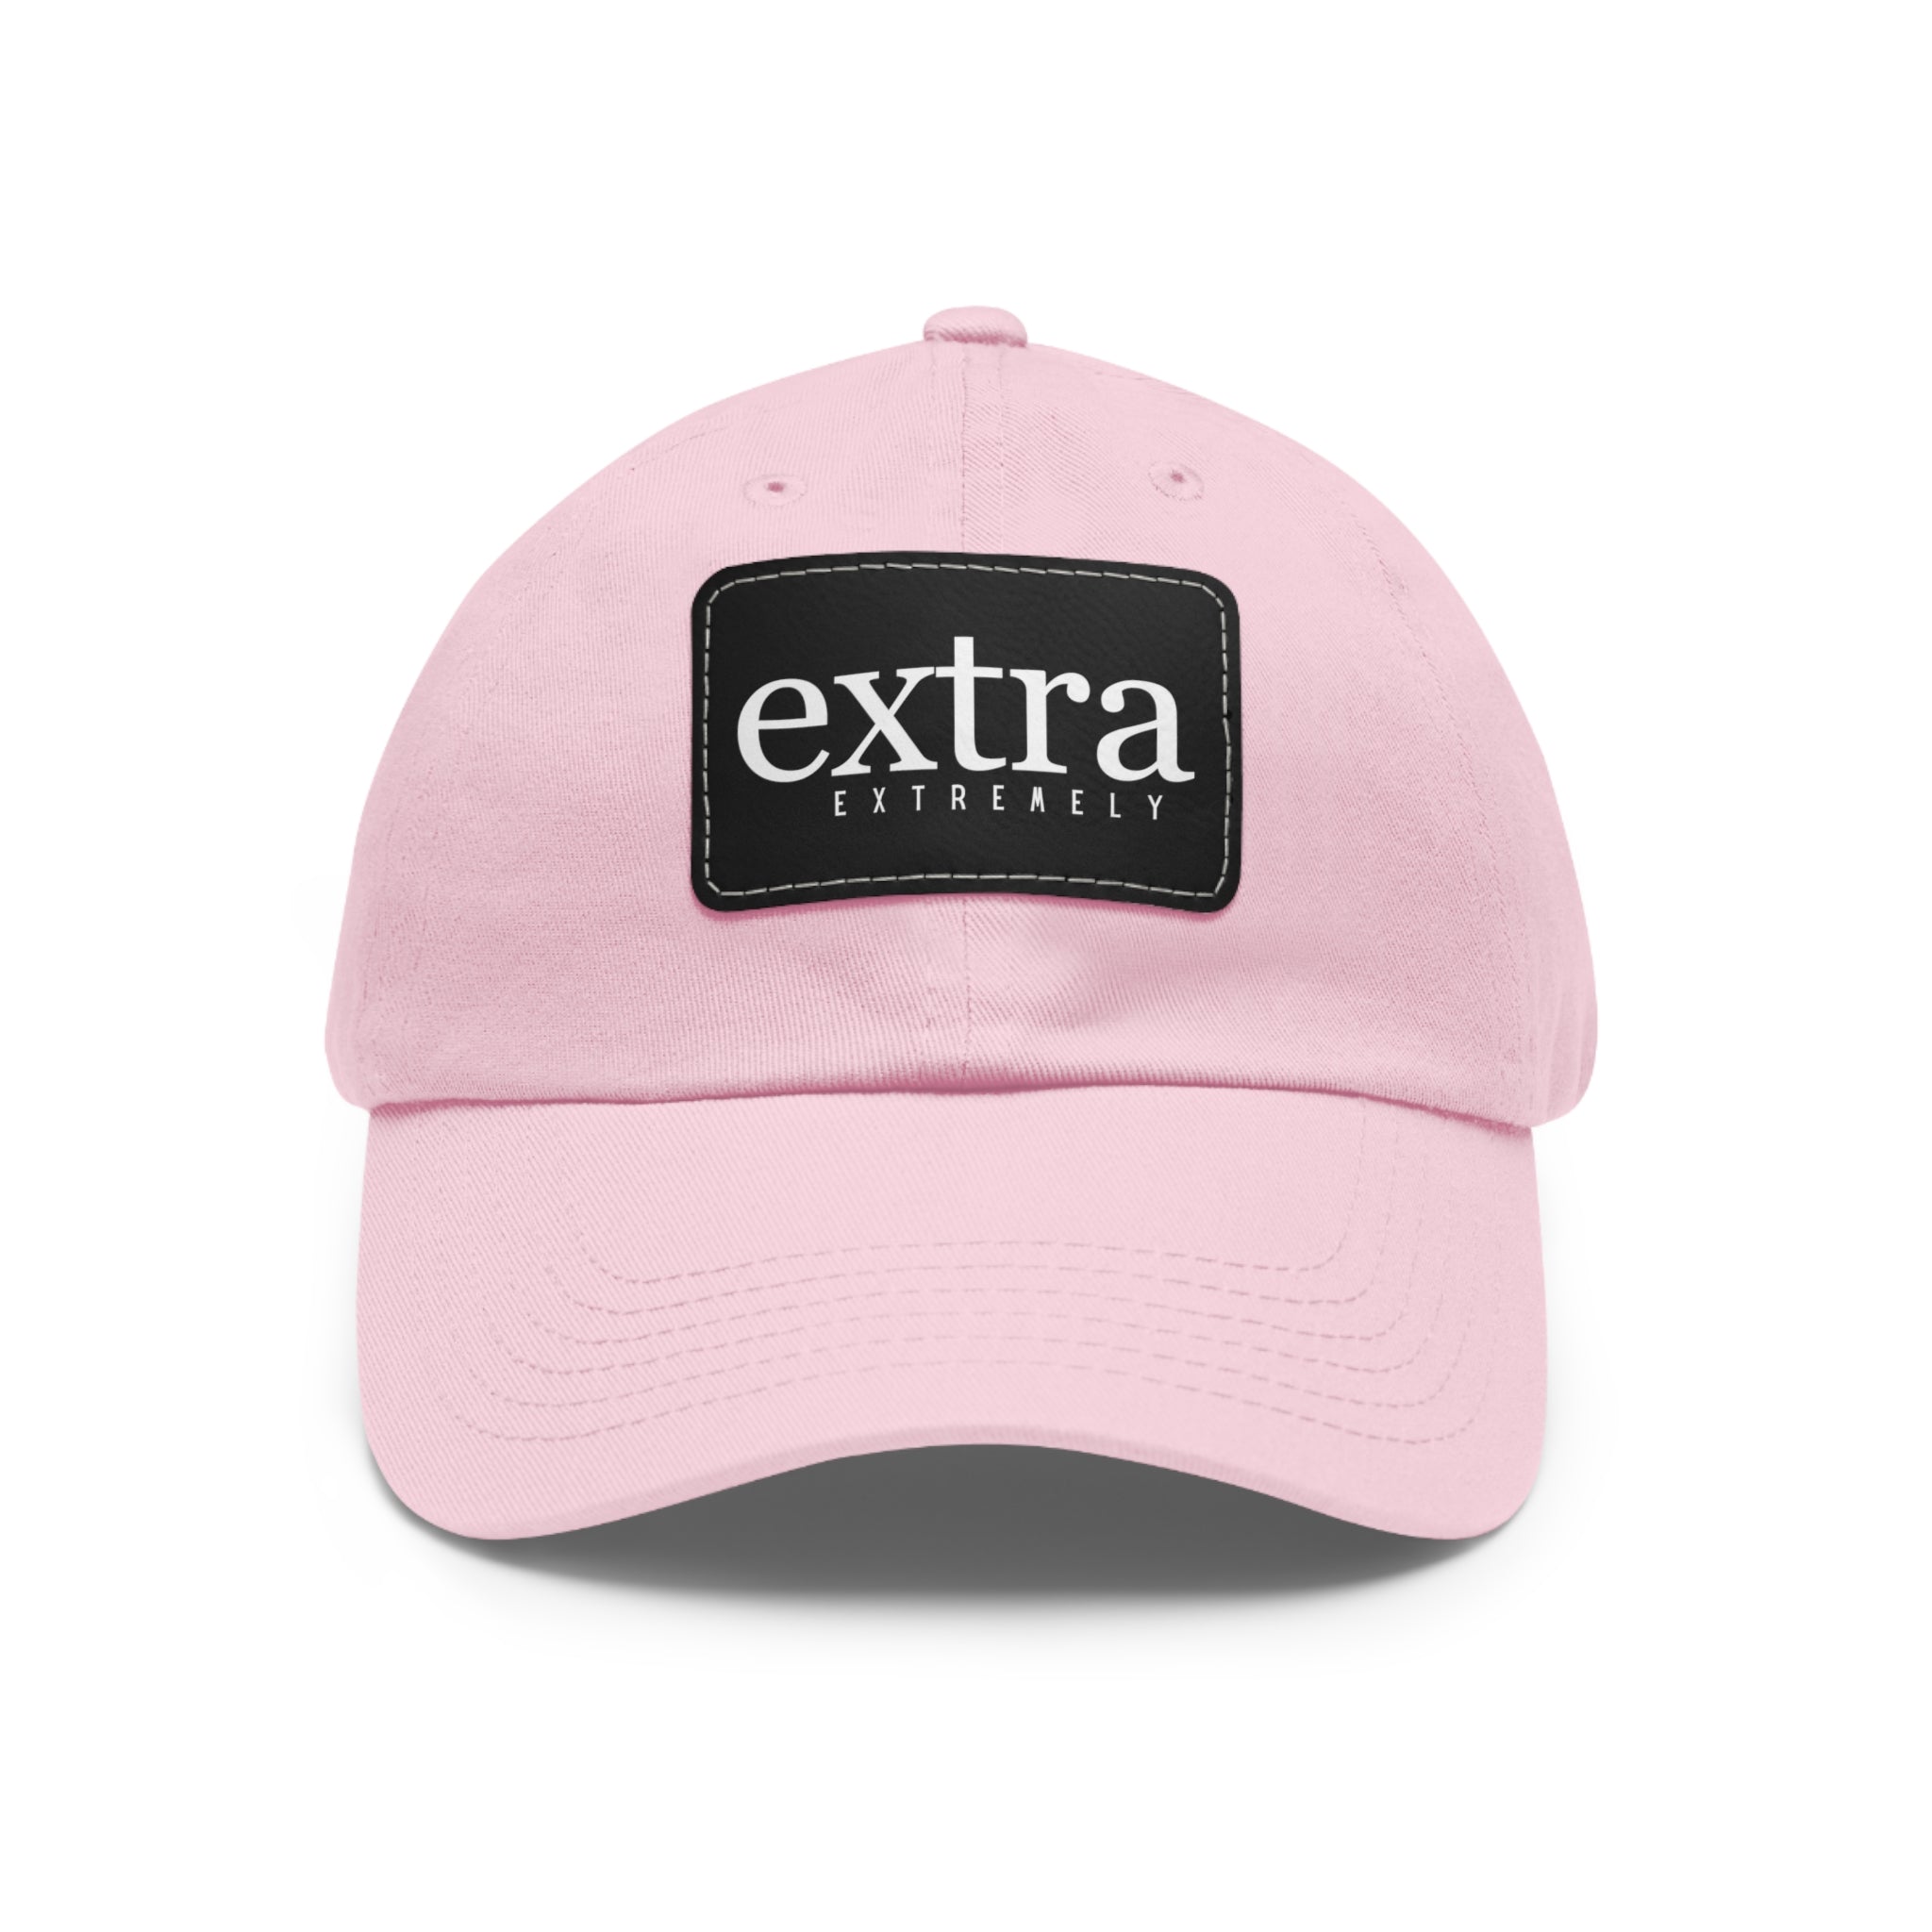 Extremely EXTRA Dad Hat with Leather Patch (Rectangle) Hats LightPinkBlackpatchRectangleOnesize The Middle Aged Groove